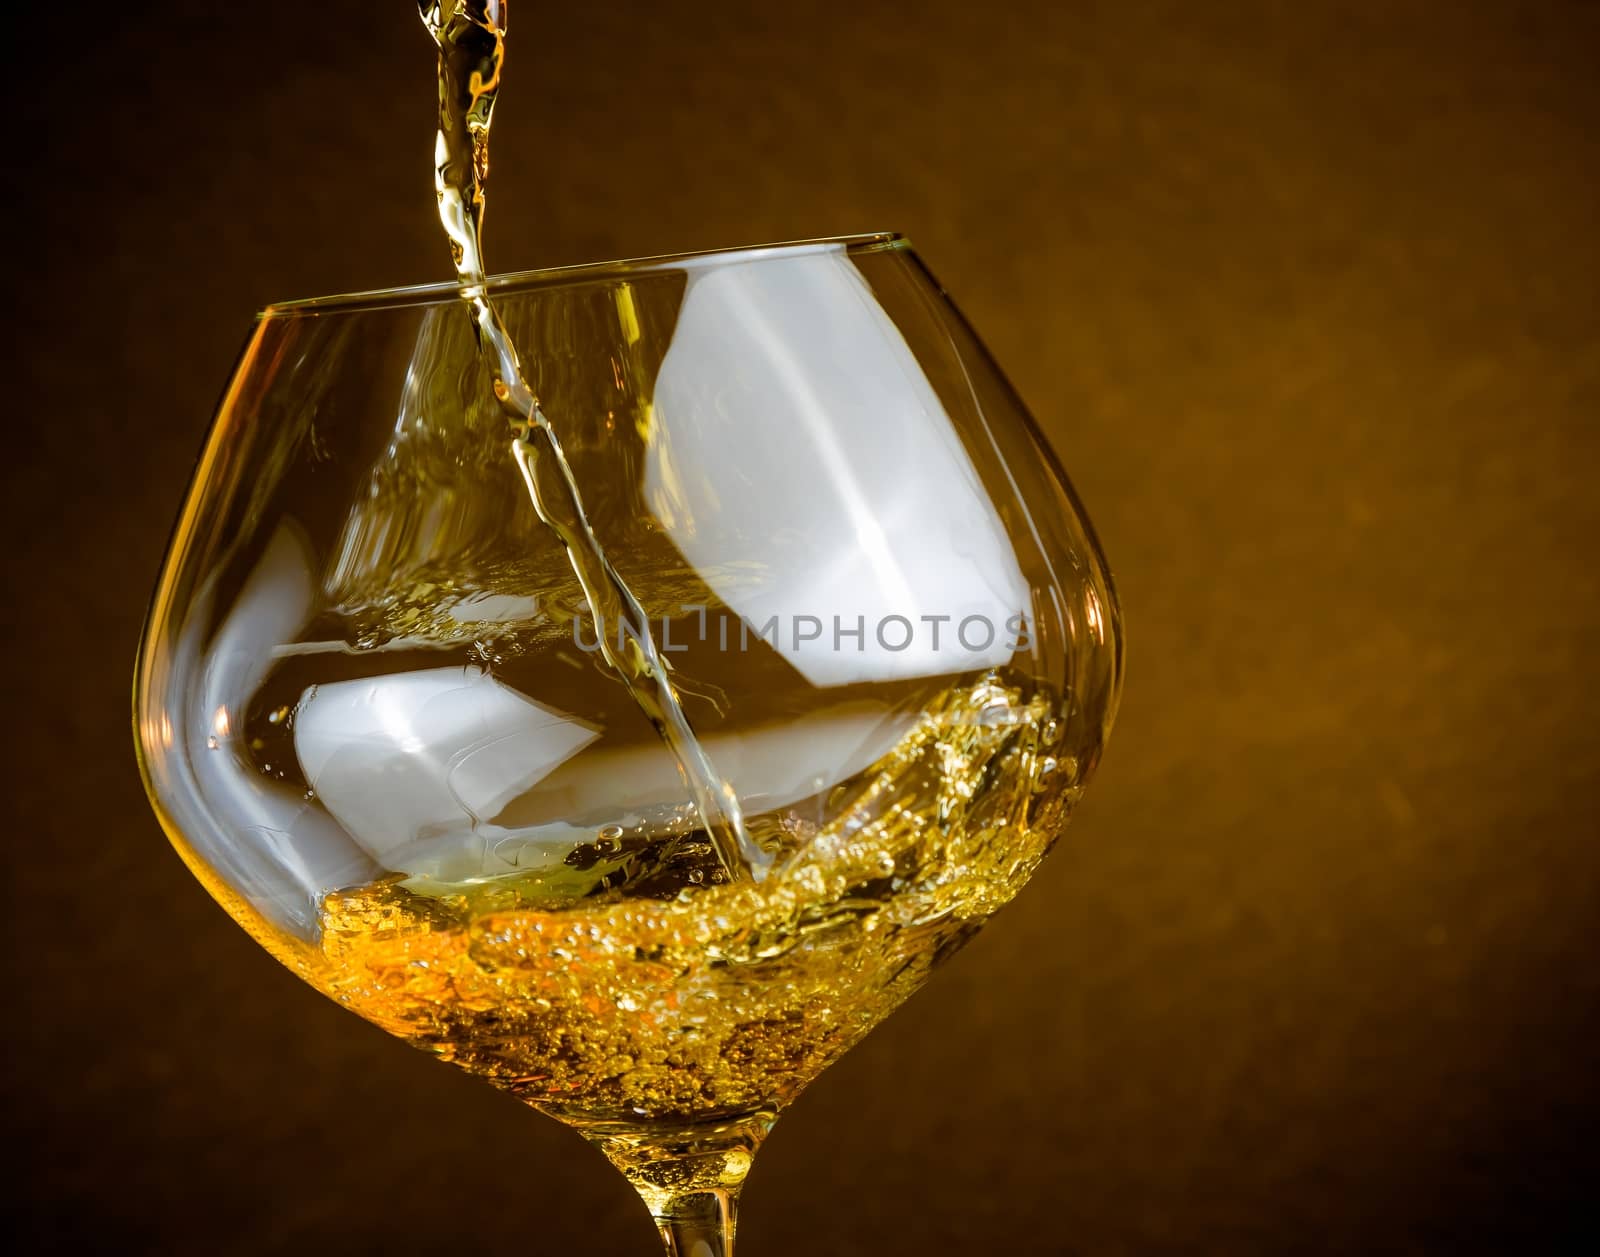 pouring white wine into a glass on golden background with space for text, warm atmosphere